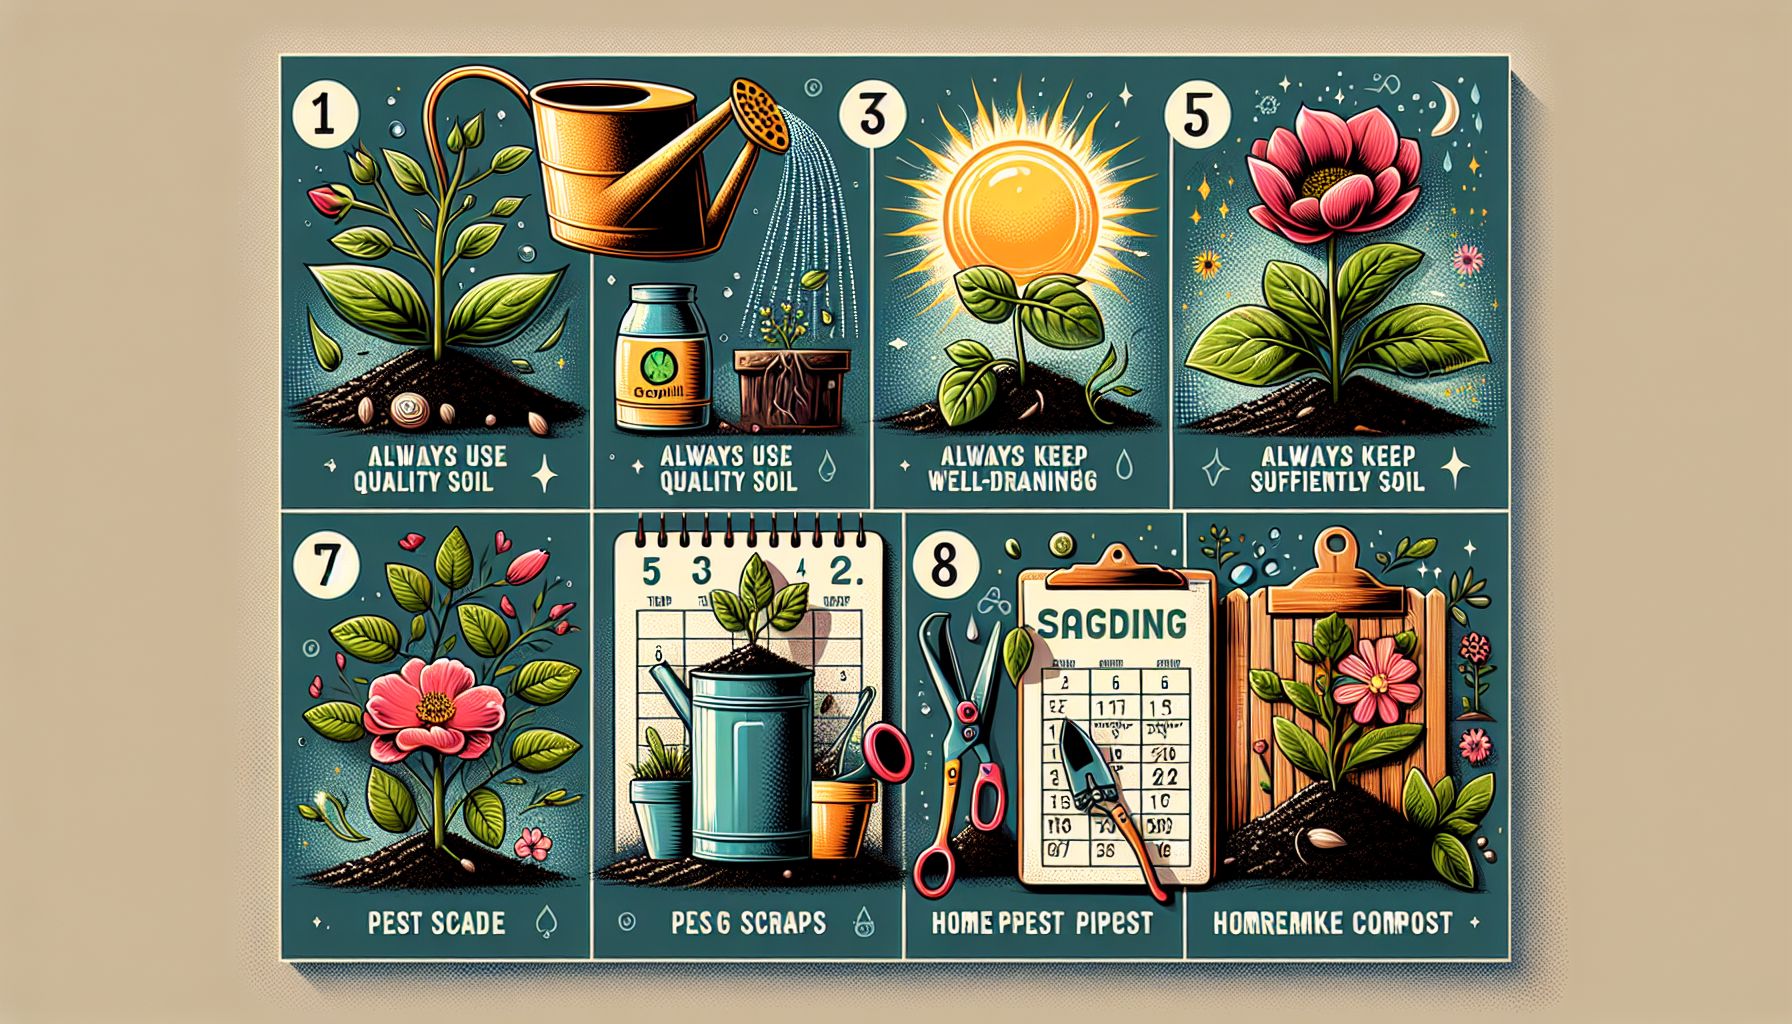 7 Essential Gardening Tips for Those Who Love to Get Their Hands Dirty